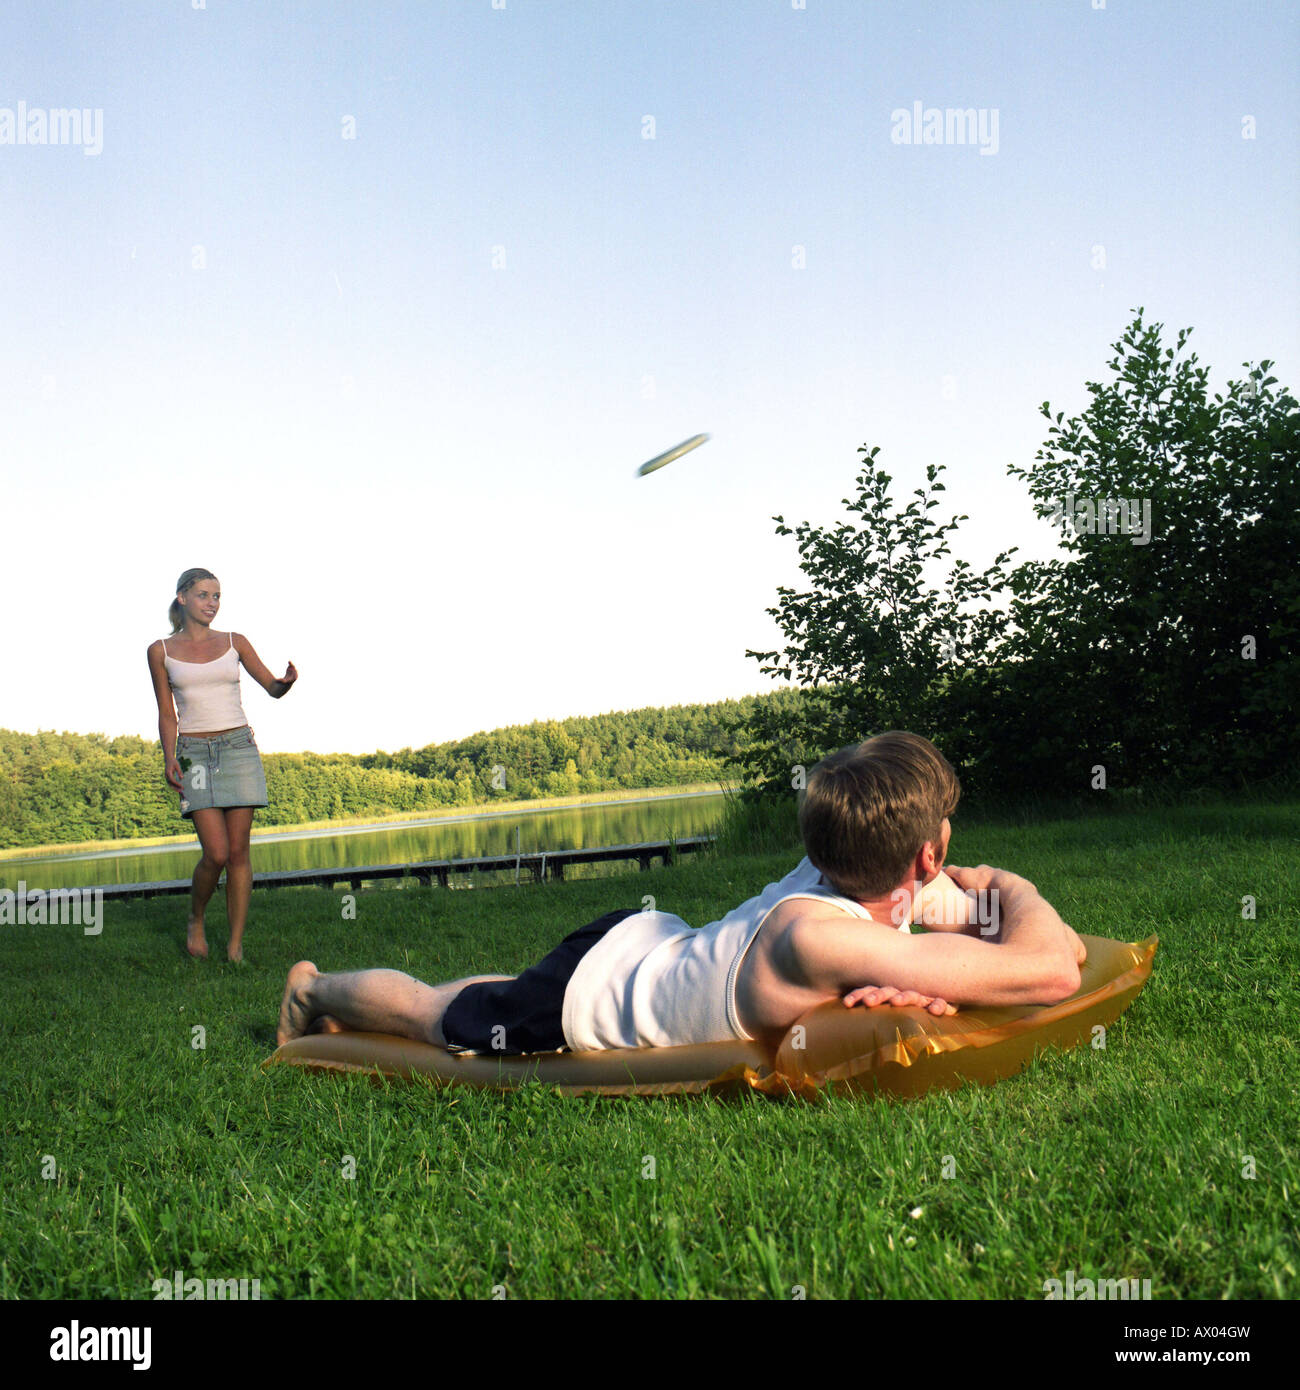 young woman is playing frisbee and getting watched by a young man on a luma at a lake Stock Photo